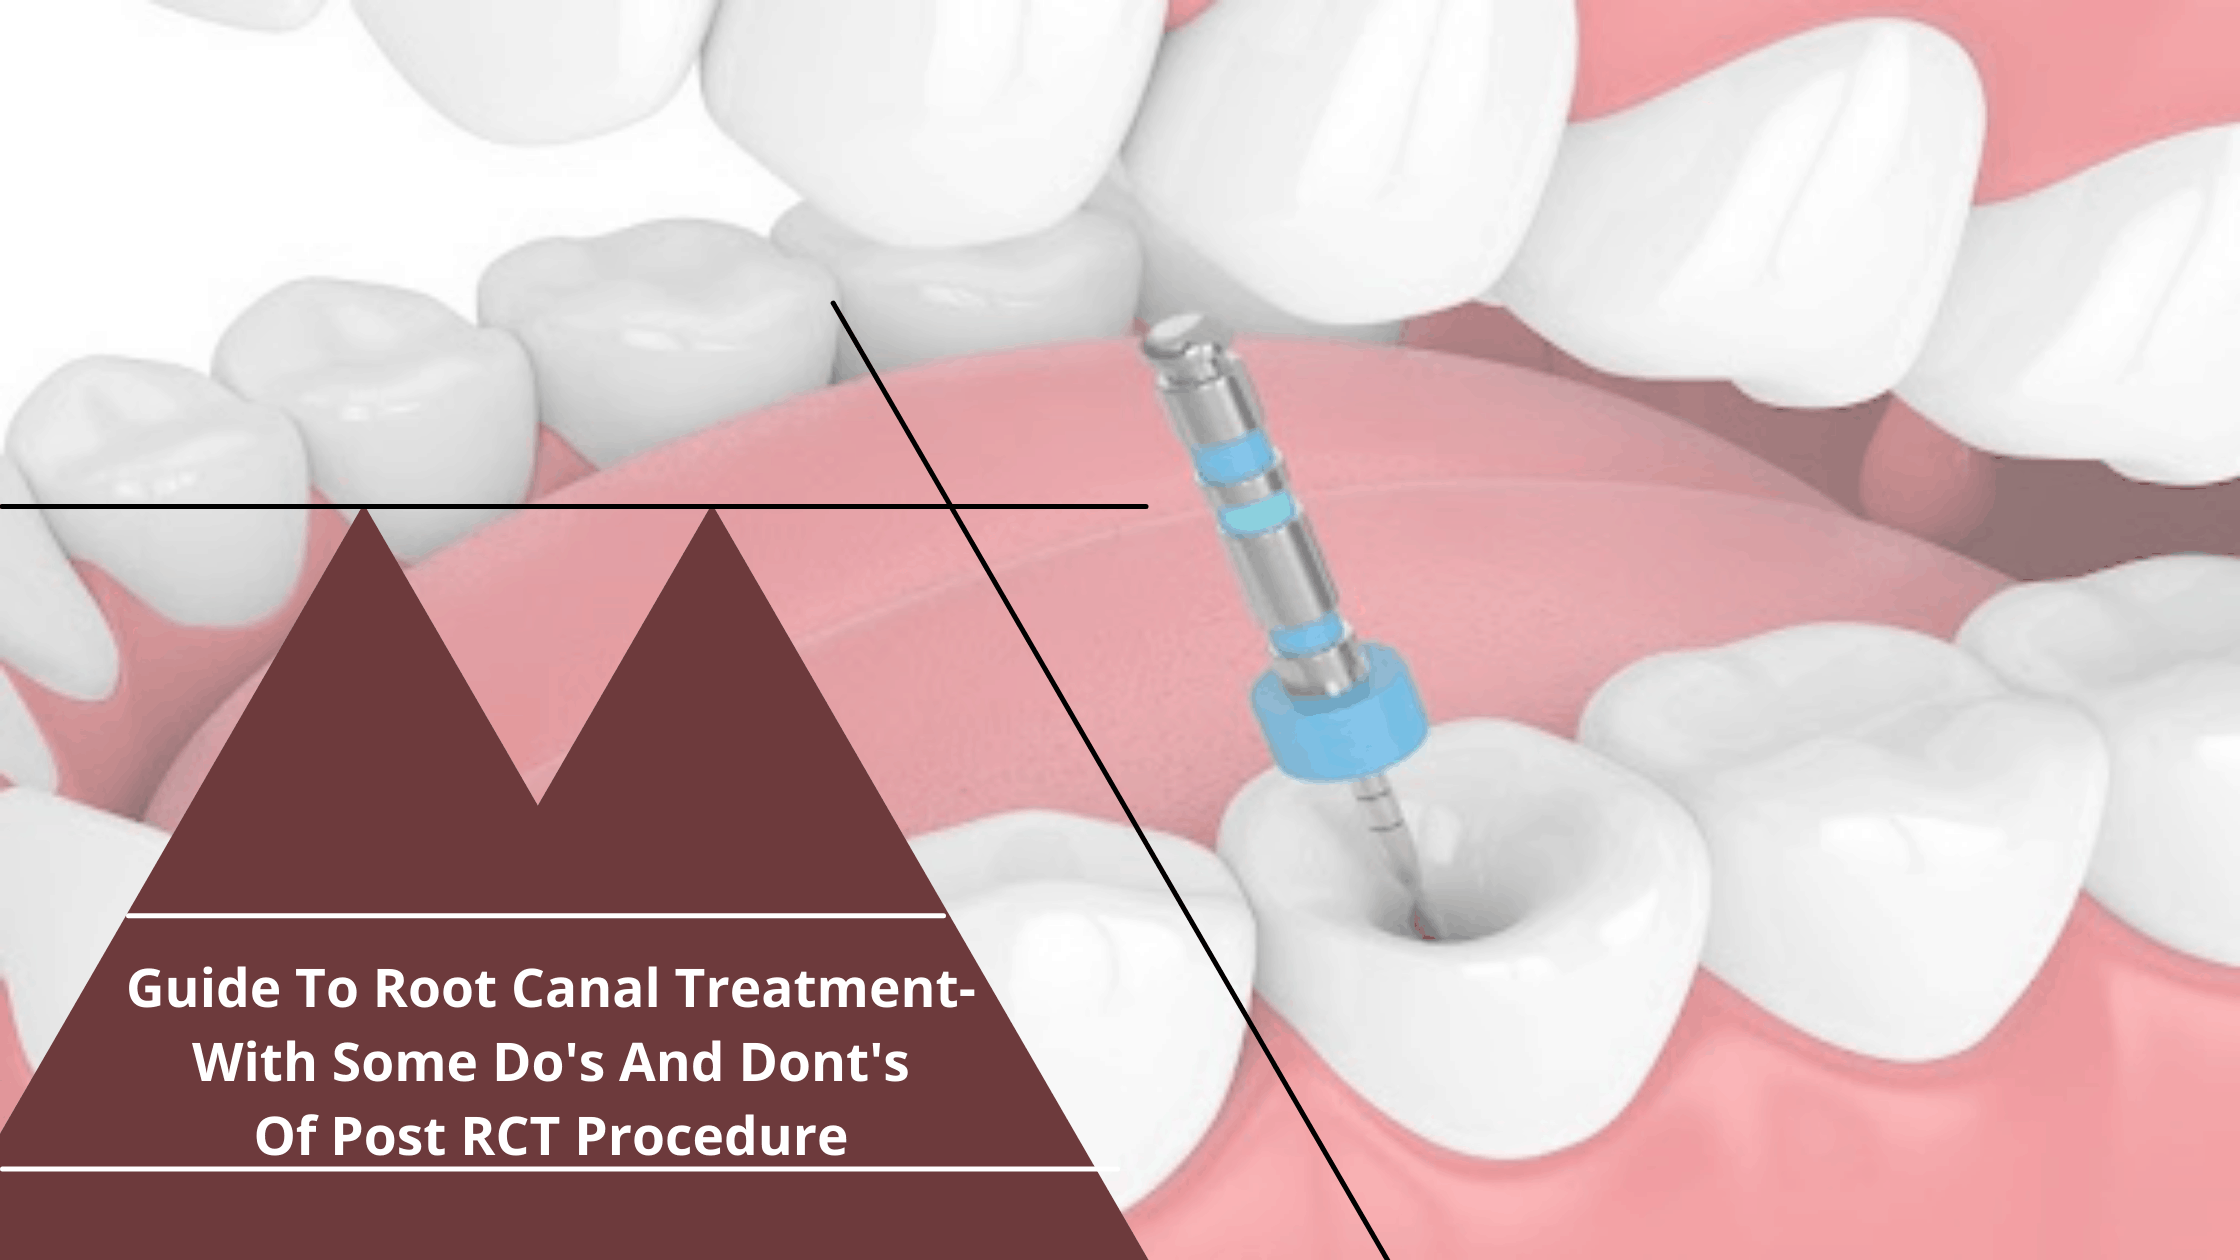 Guide To Root Canal Treatment- With Some Do’s And Dont’s Of Post RCT Procedure